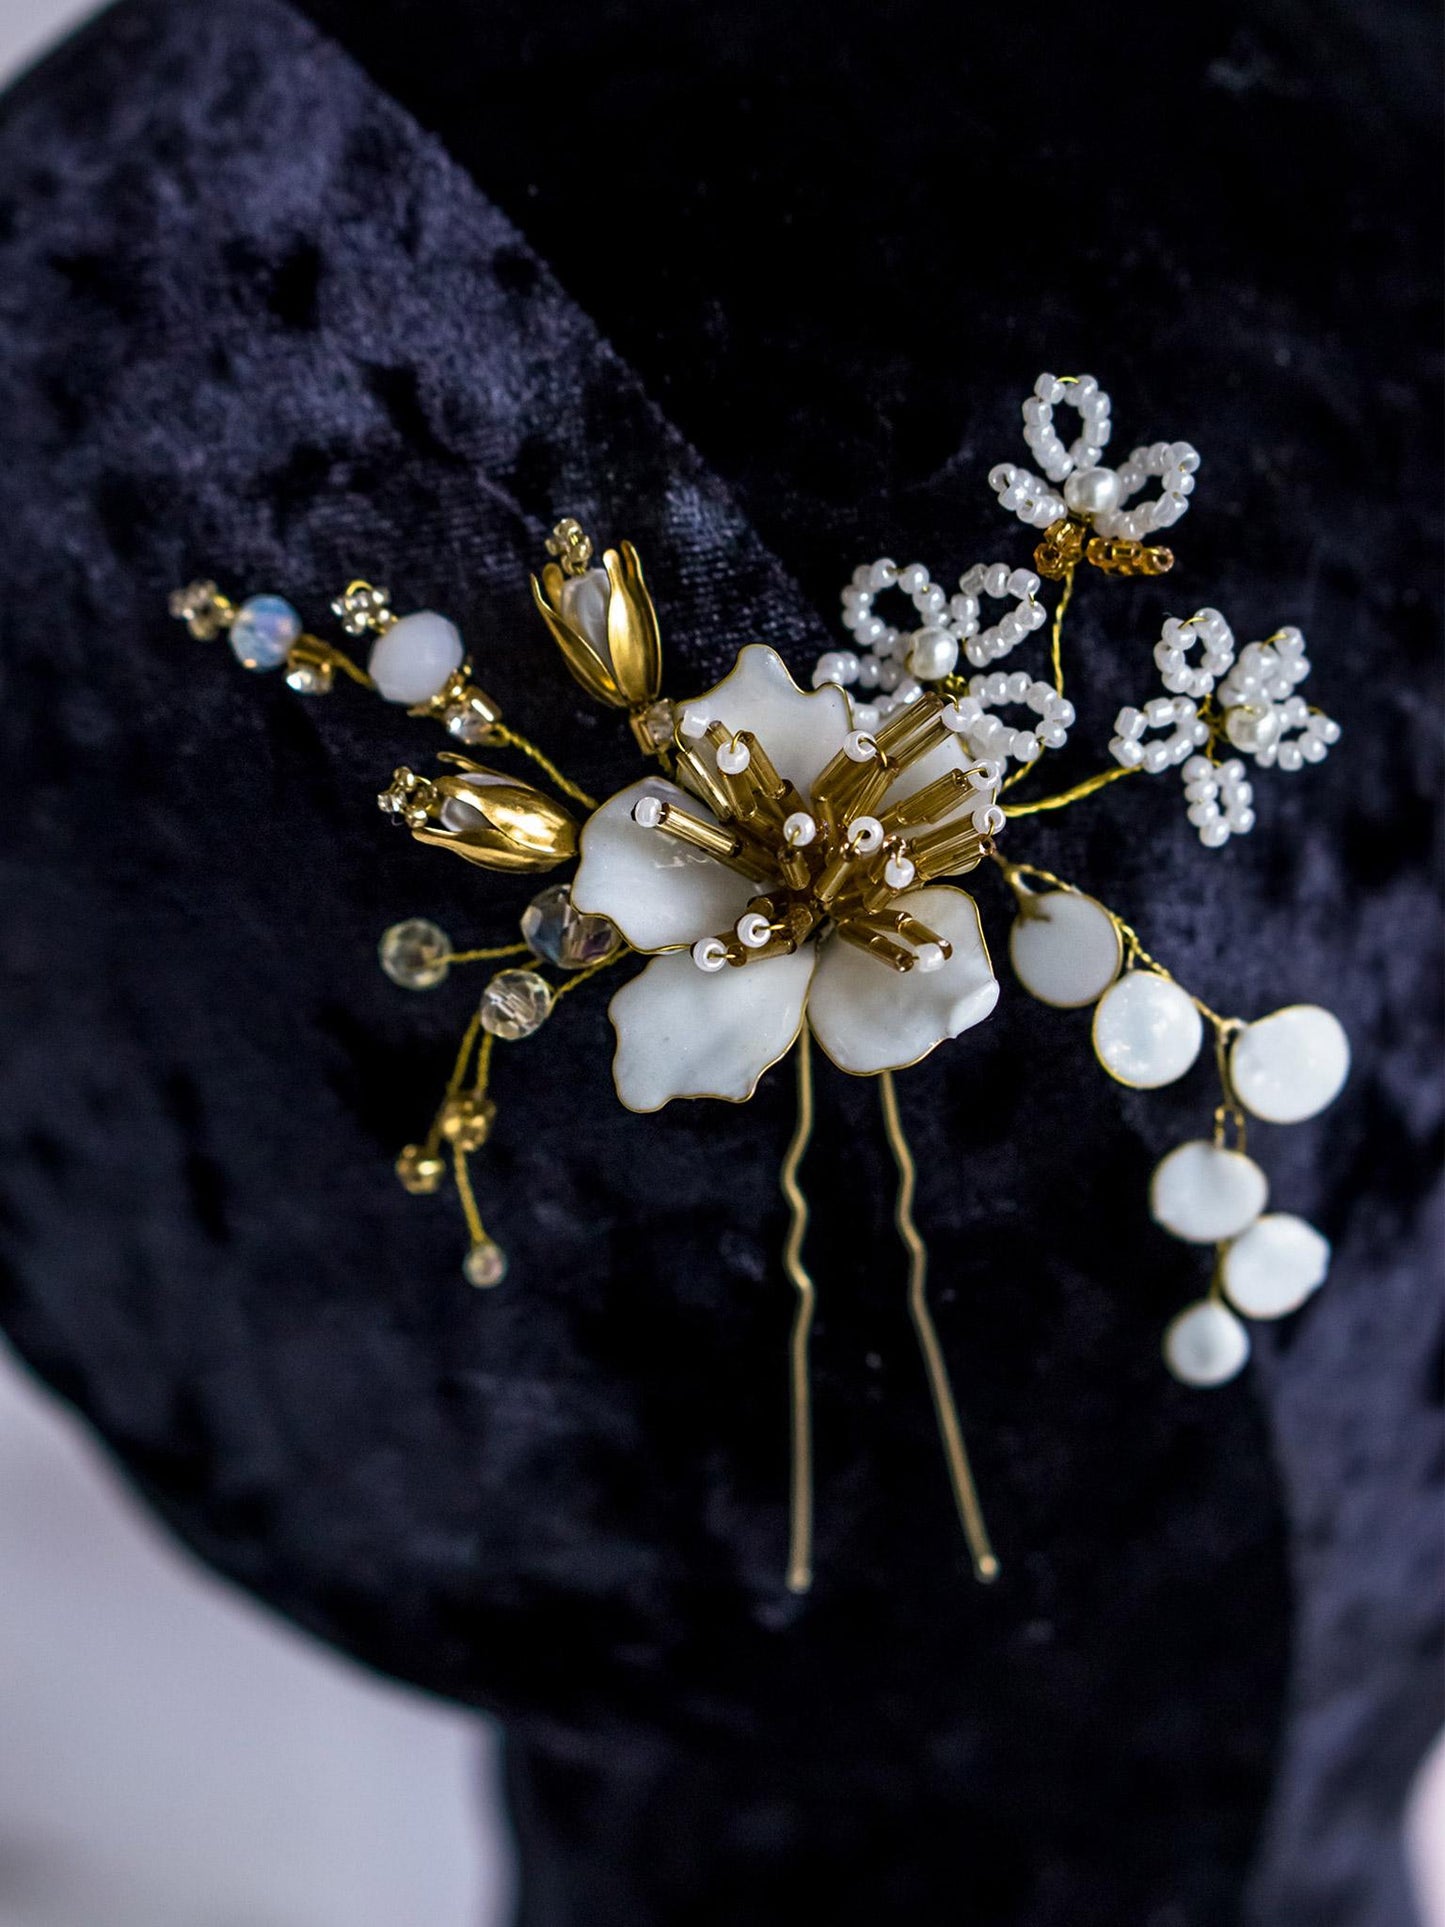 Close-up of gold hair pin with beaded flower center